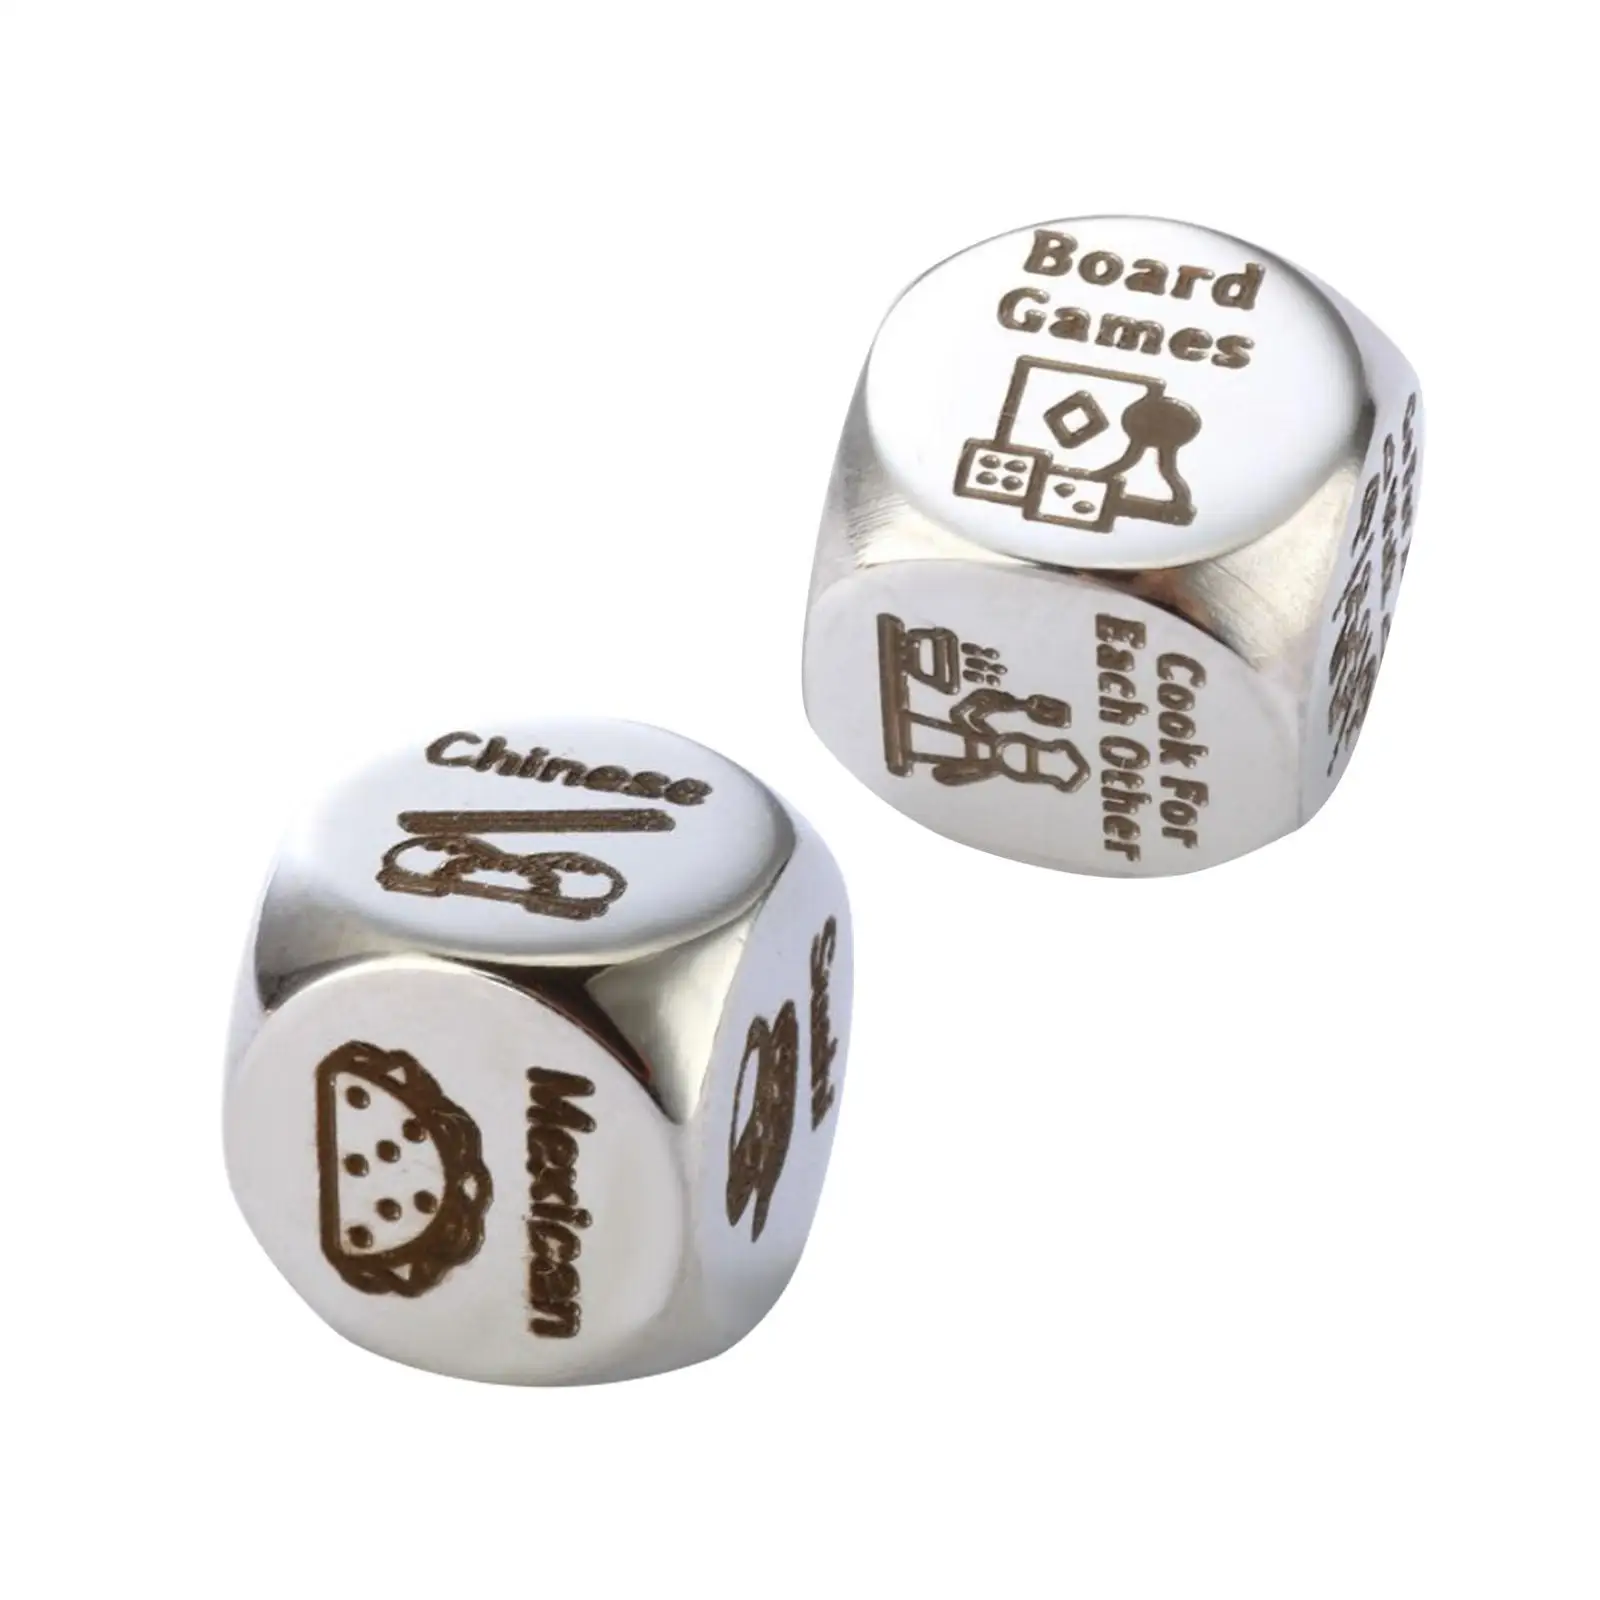 2x Food Decision Dice Date Night Dice for Honeymoon Valentines Gifts Wedding